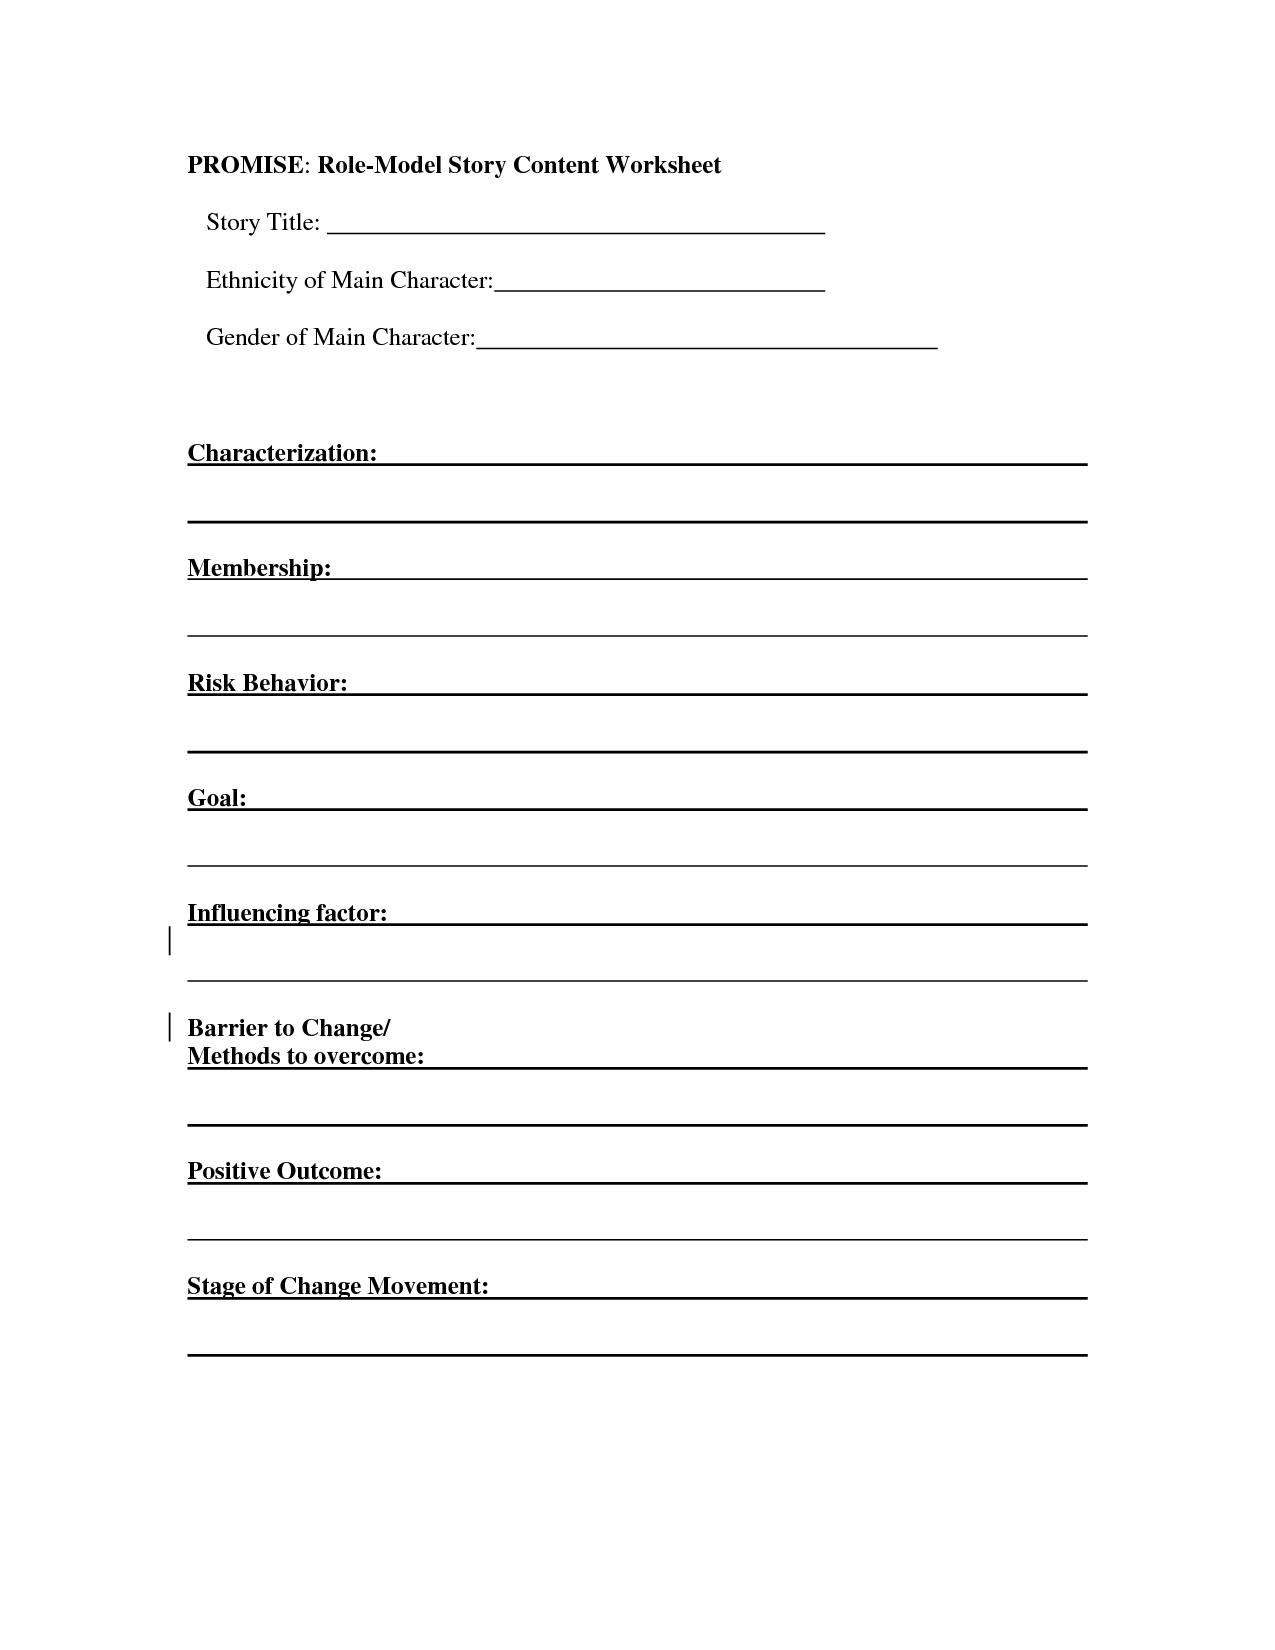 8 Best Images of Stages Of Change Worksheet Addiction  Stages of Change Questionnaire 